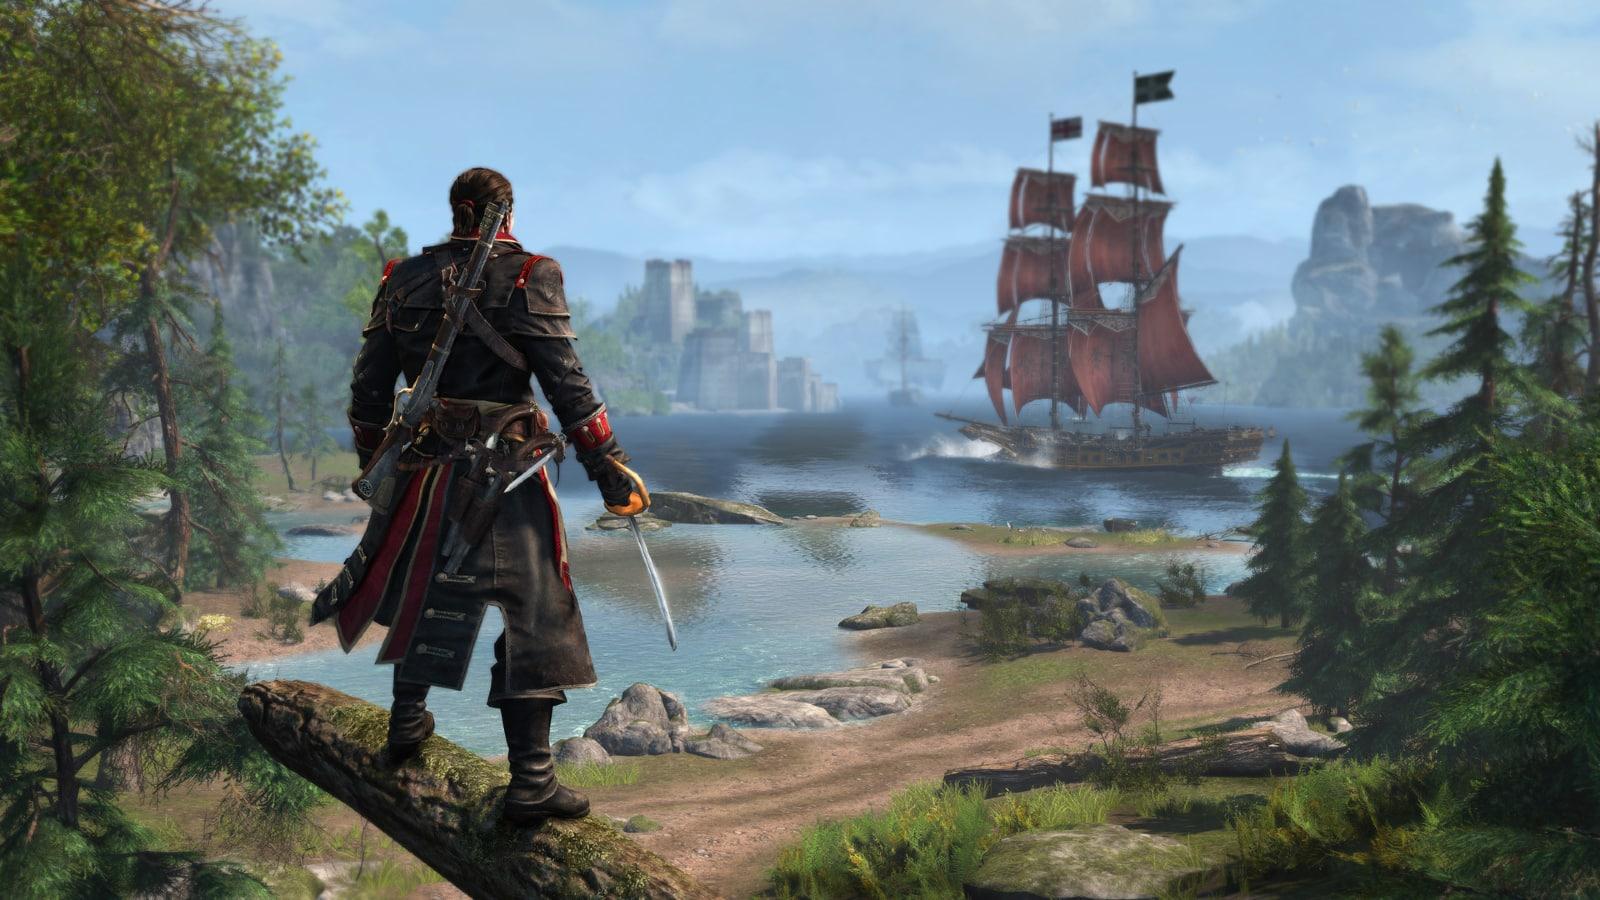 Assassin's Creed 1 Full PC Game Free Download